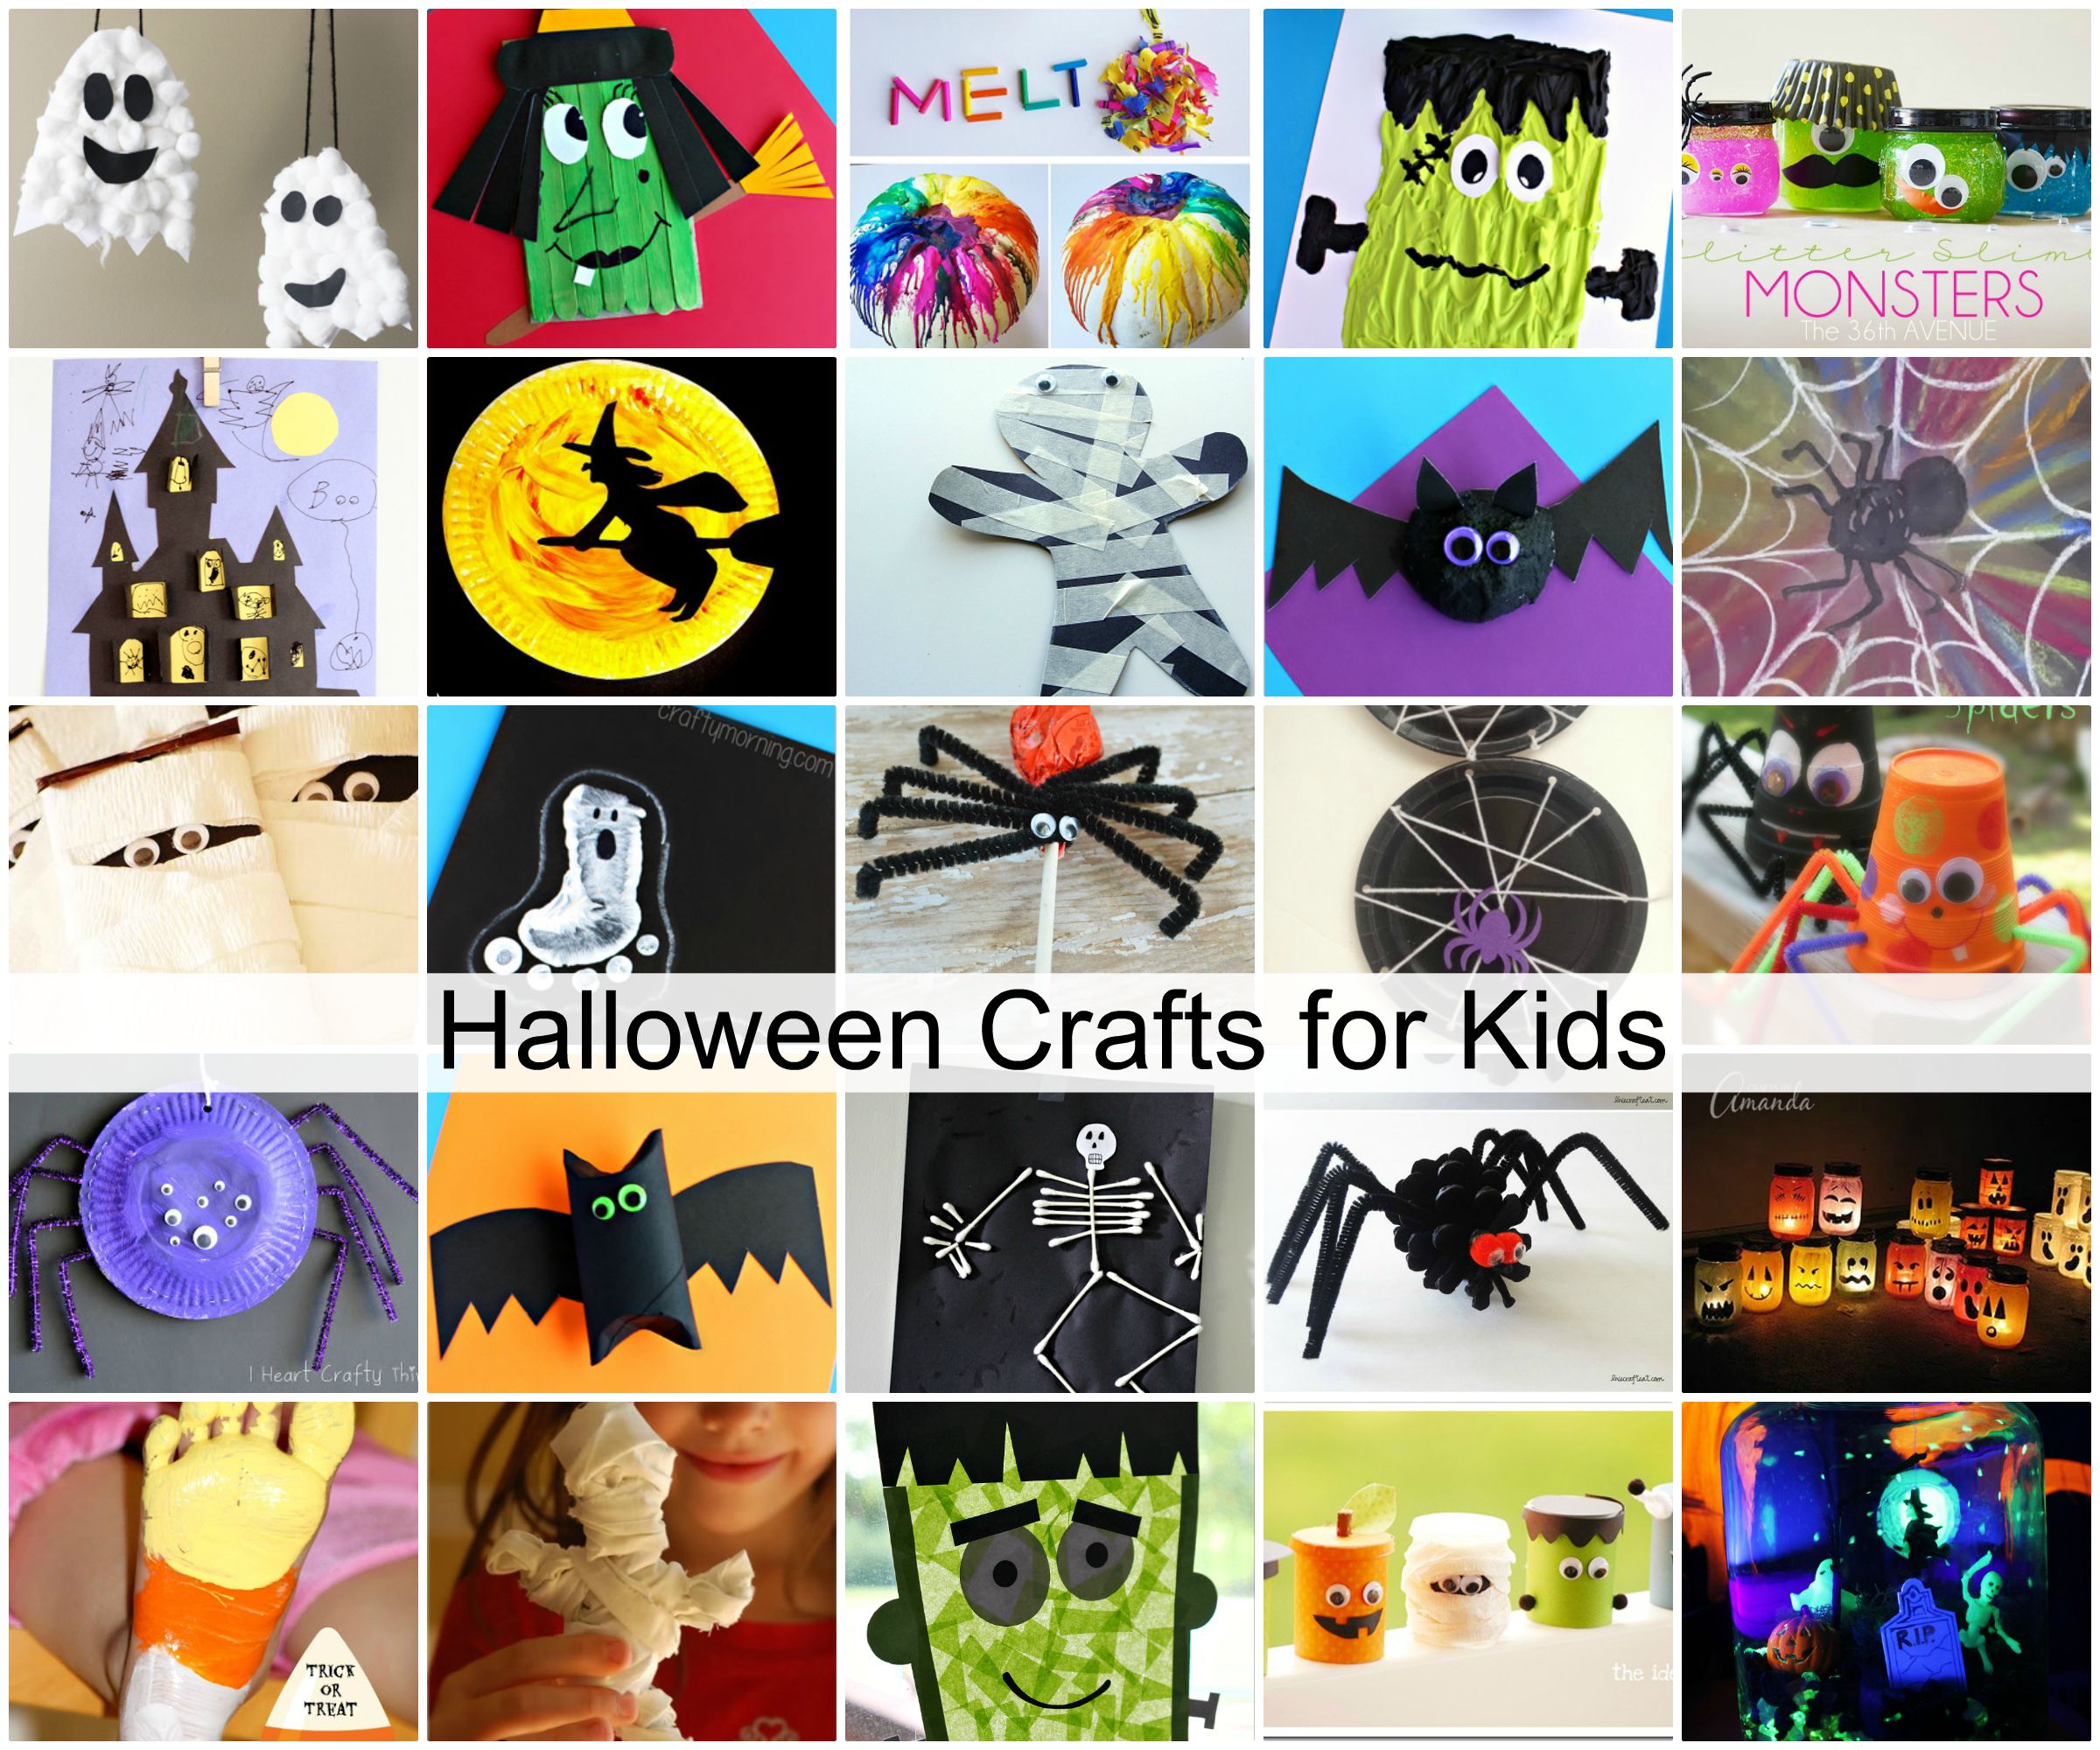 Halloween Crafts for Kids - The Idea Room